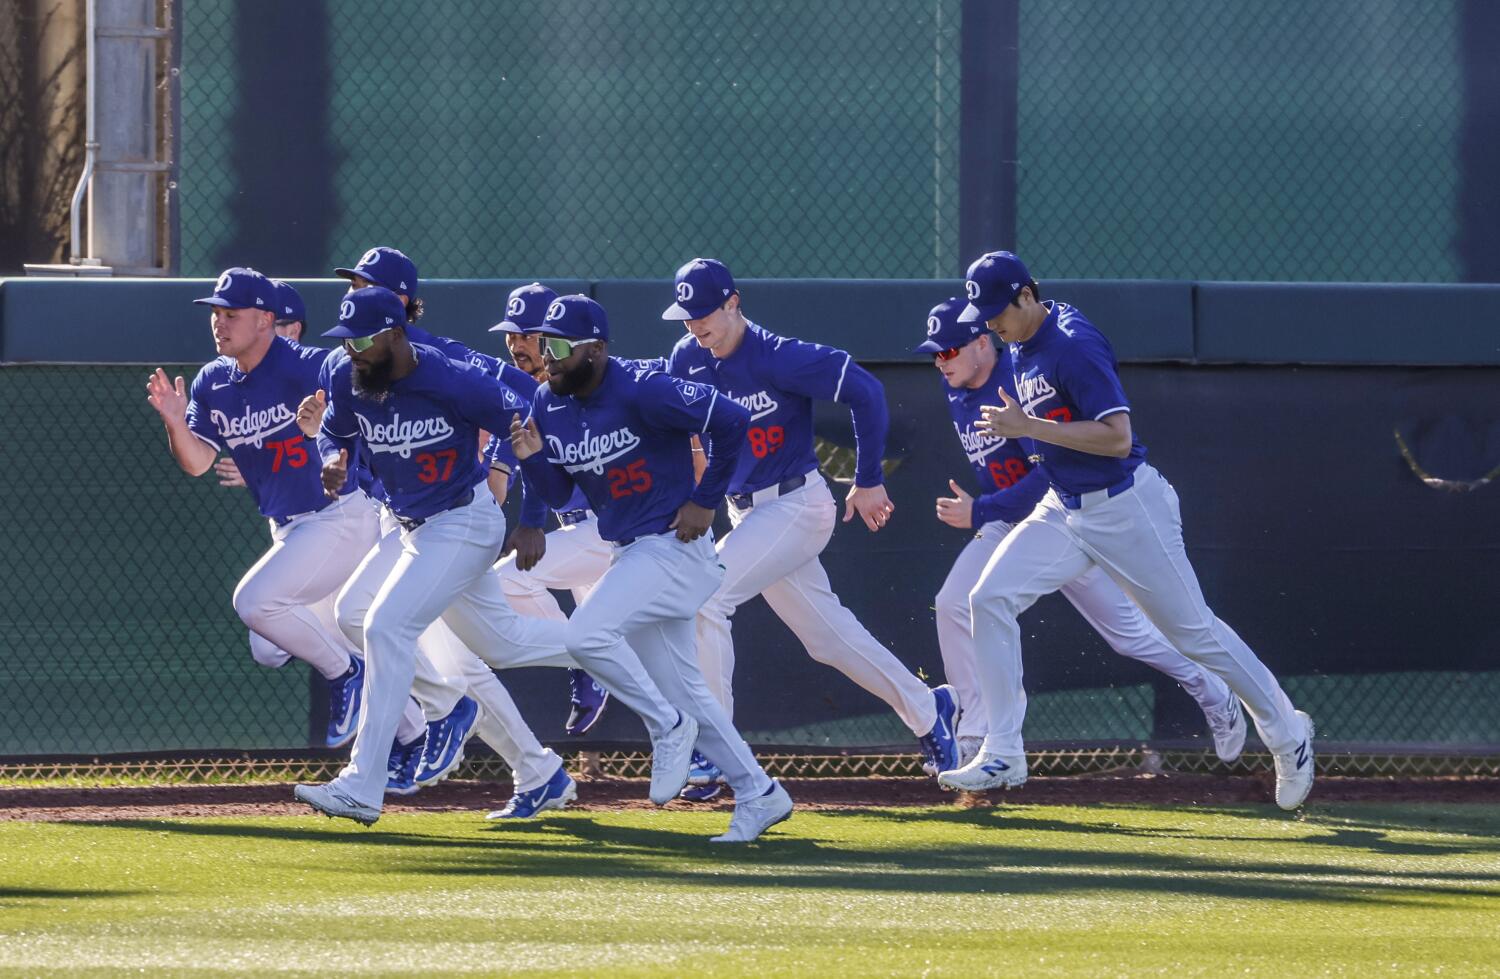 A Spanish radio station in Las Vegas adds MLB broadcasts — of the Dodgers, not the A's